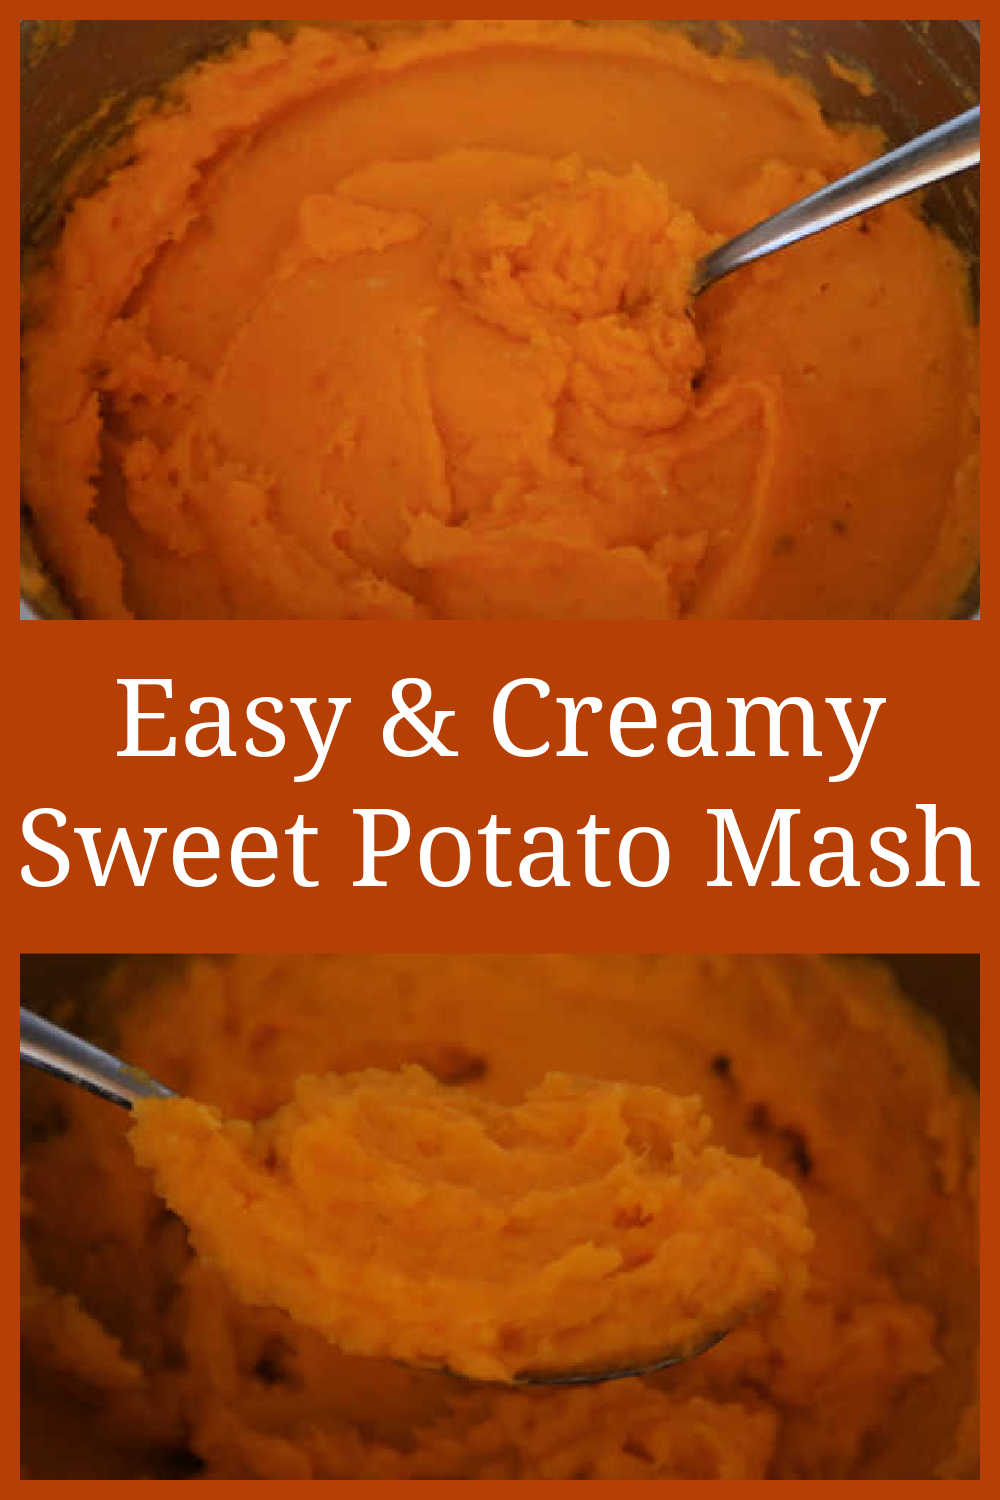 Easy Sweet Potato Mash Recipe - How to make the best healthy and creamy garlic mashed sweet potatoes side dish - with the video tutorial.